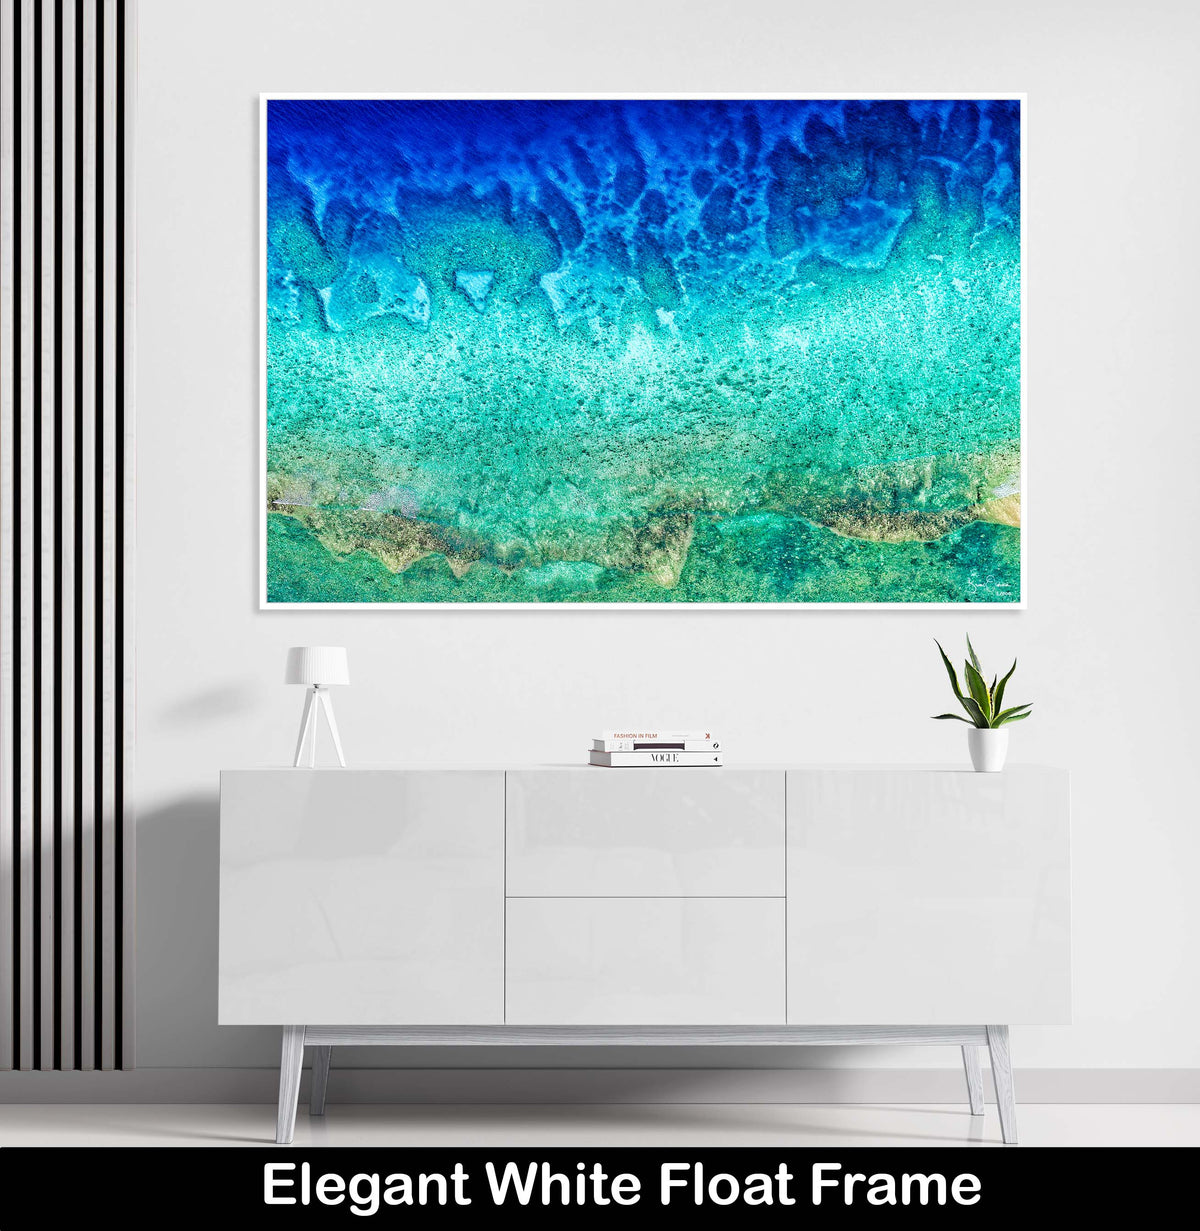 Aqua Blue Abstract Luxury Float Frame Wall Art Textures Patterns Coral Reef Painted by Nature